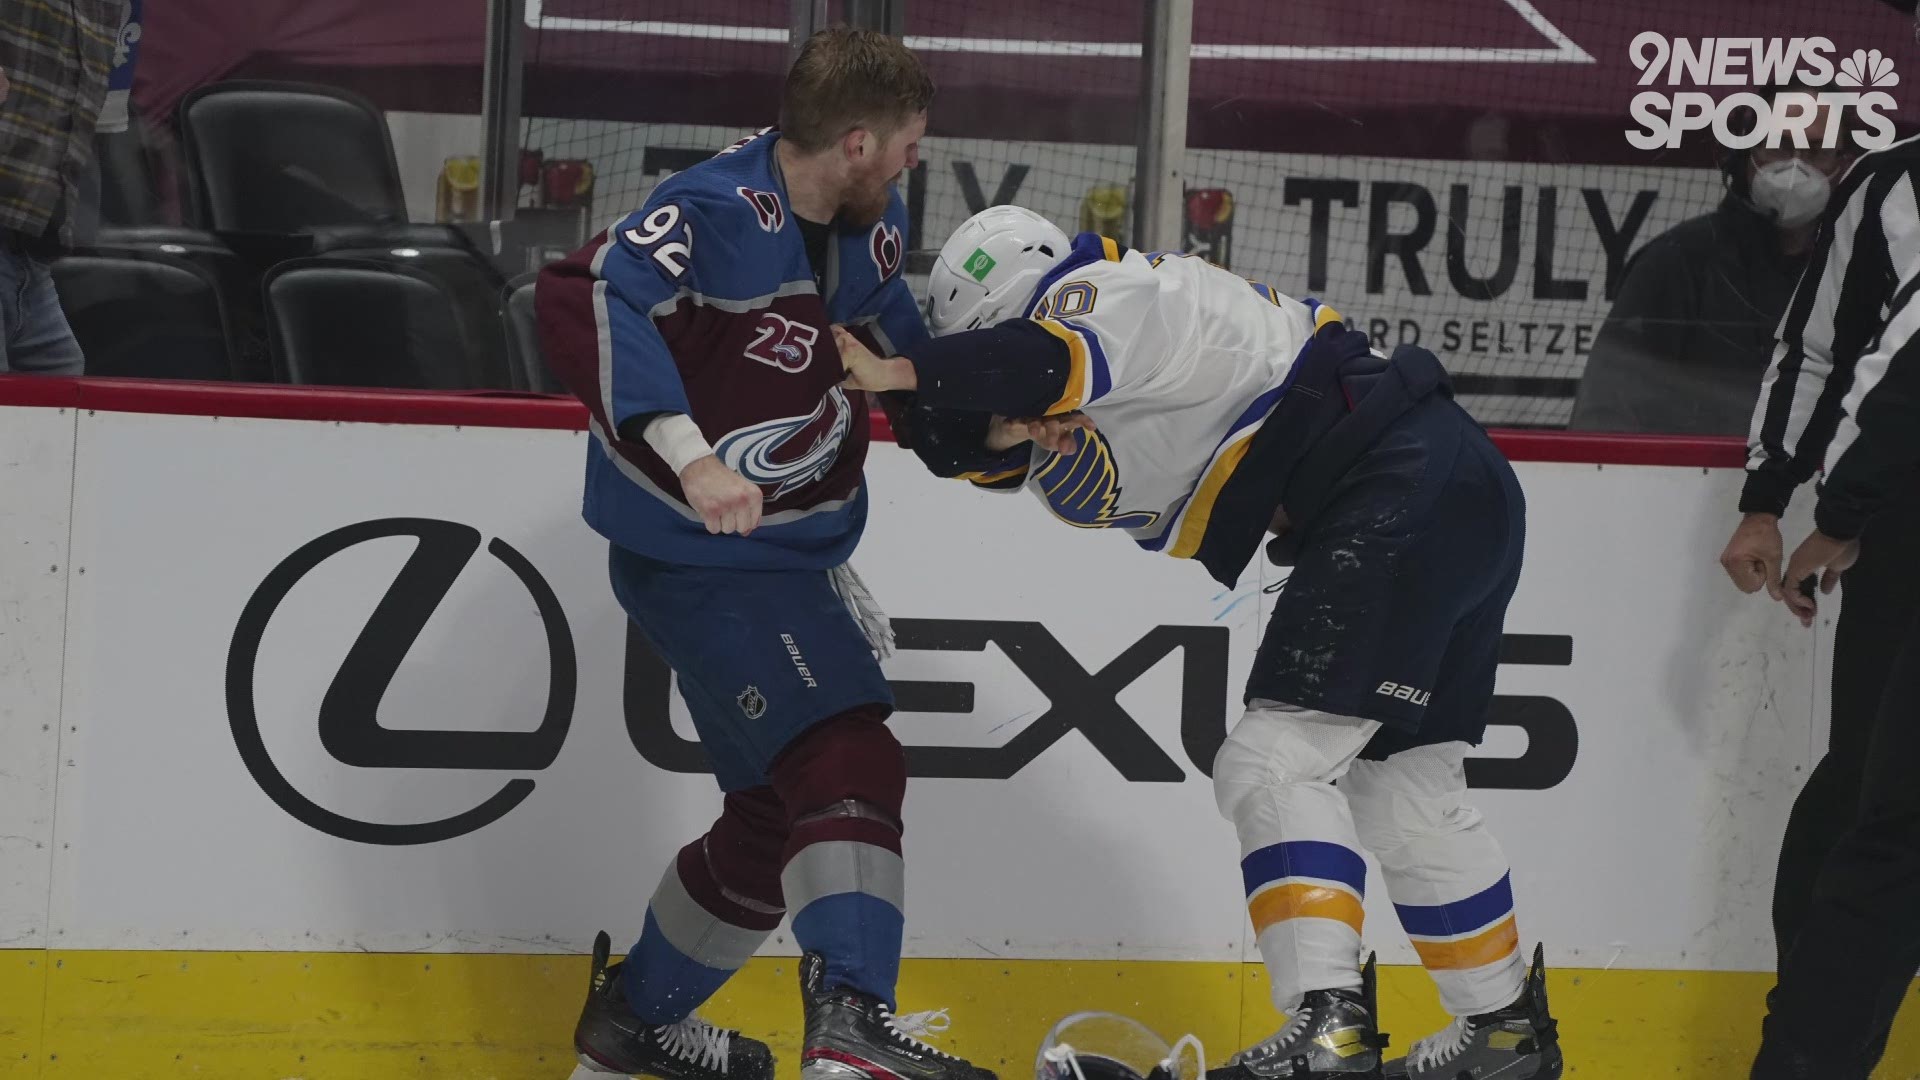 Landeskog was set to be a free agent on Wednesday, but the two sides got a deal done before he could hit the open market.